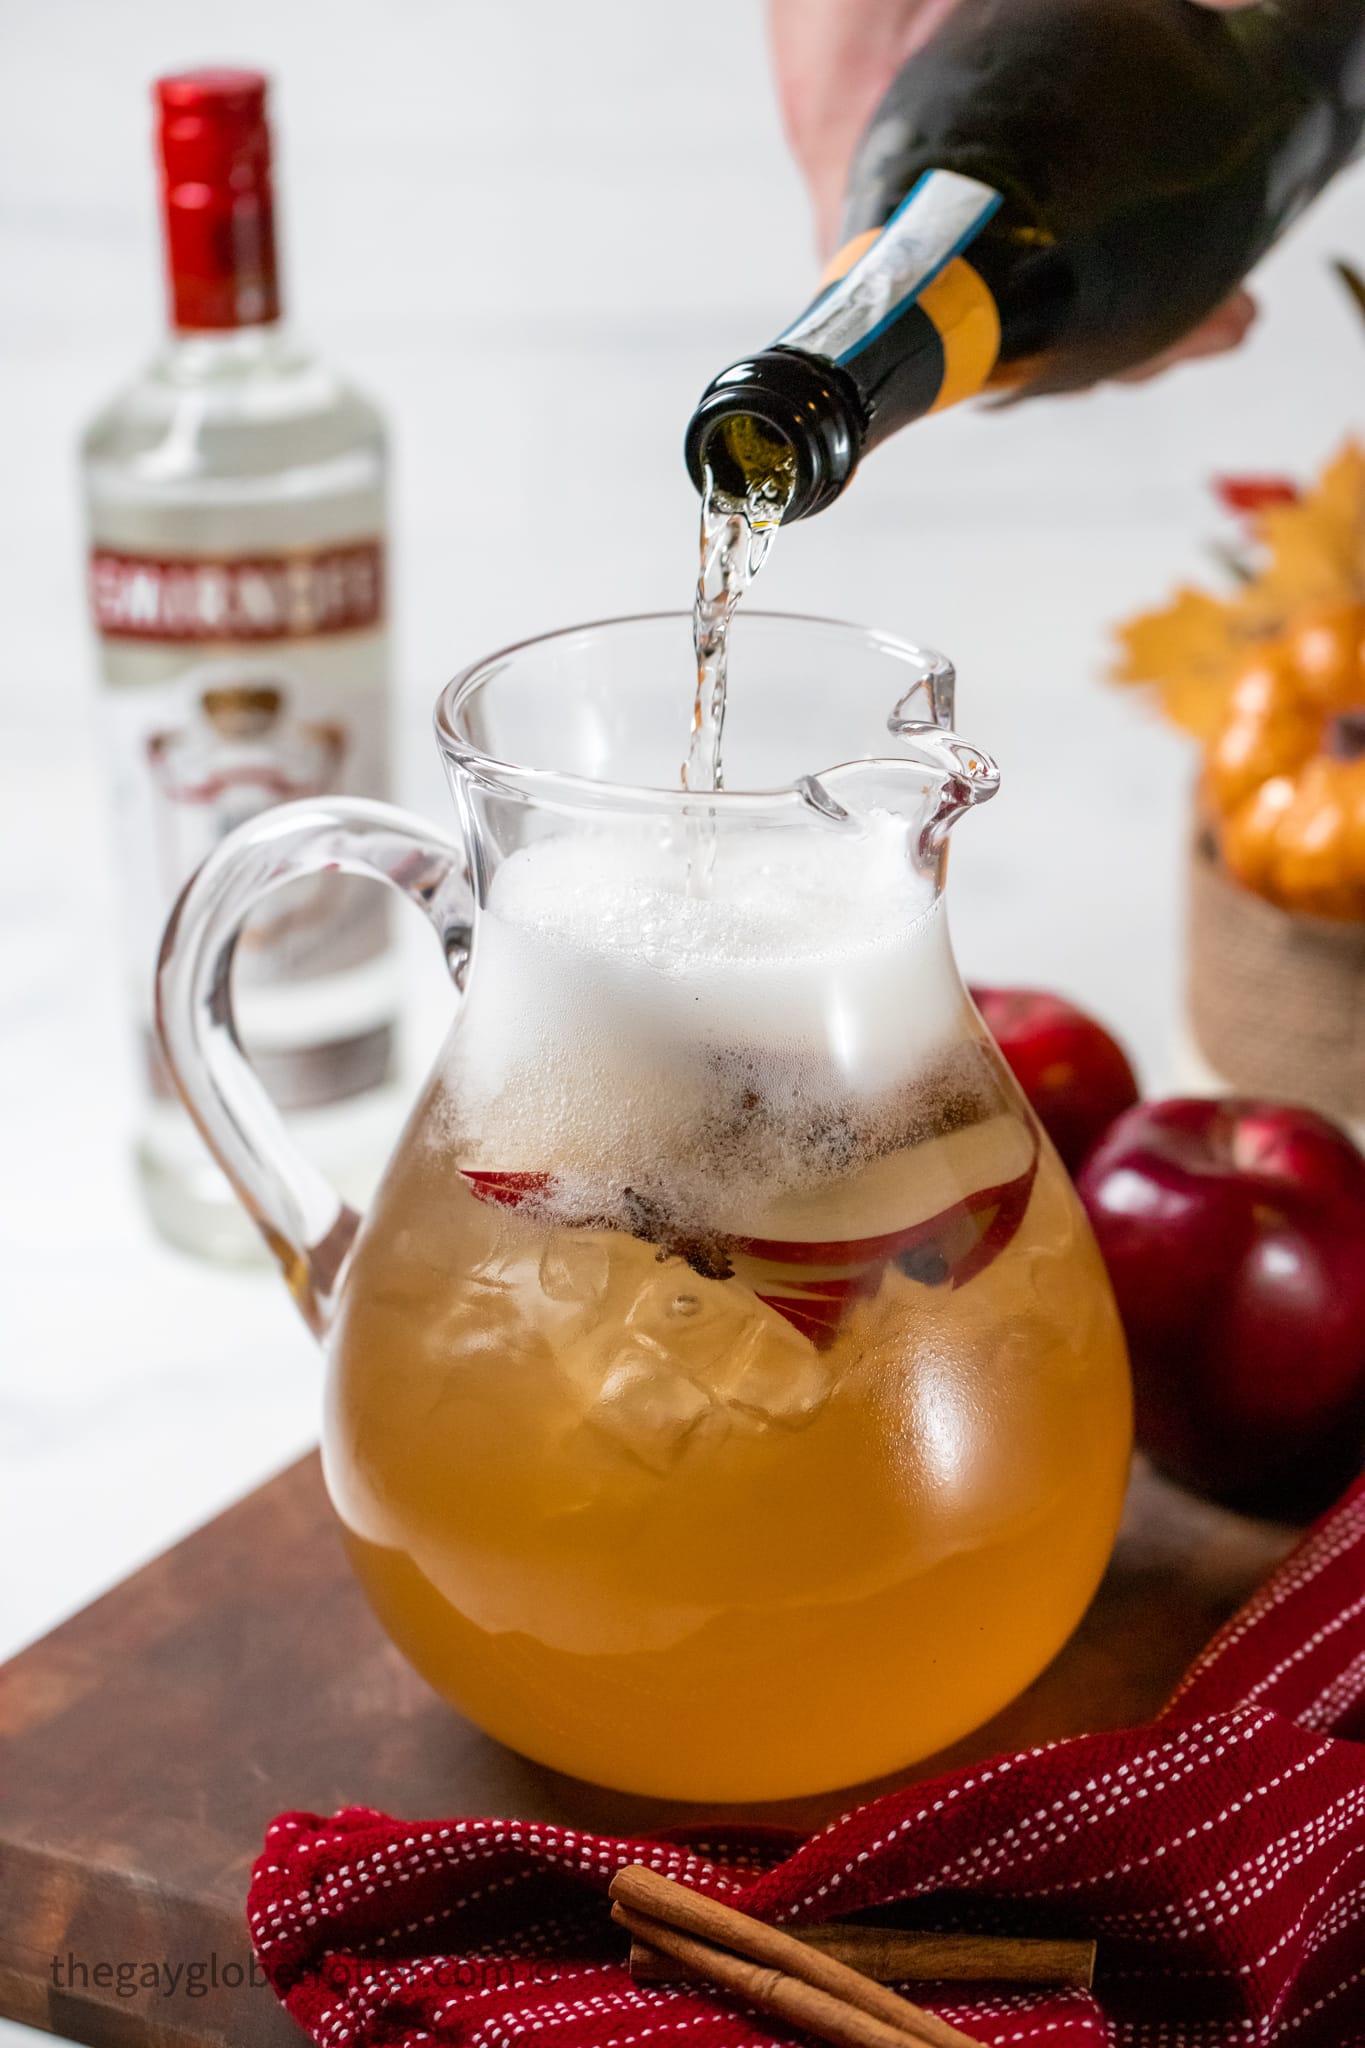 Thanksgiving Punch For A Crowd {4 Ingredients!} - The Gay Globetrotter